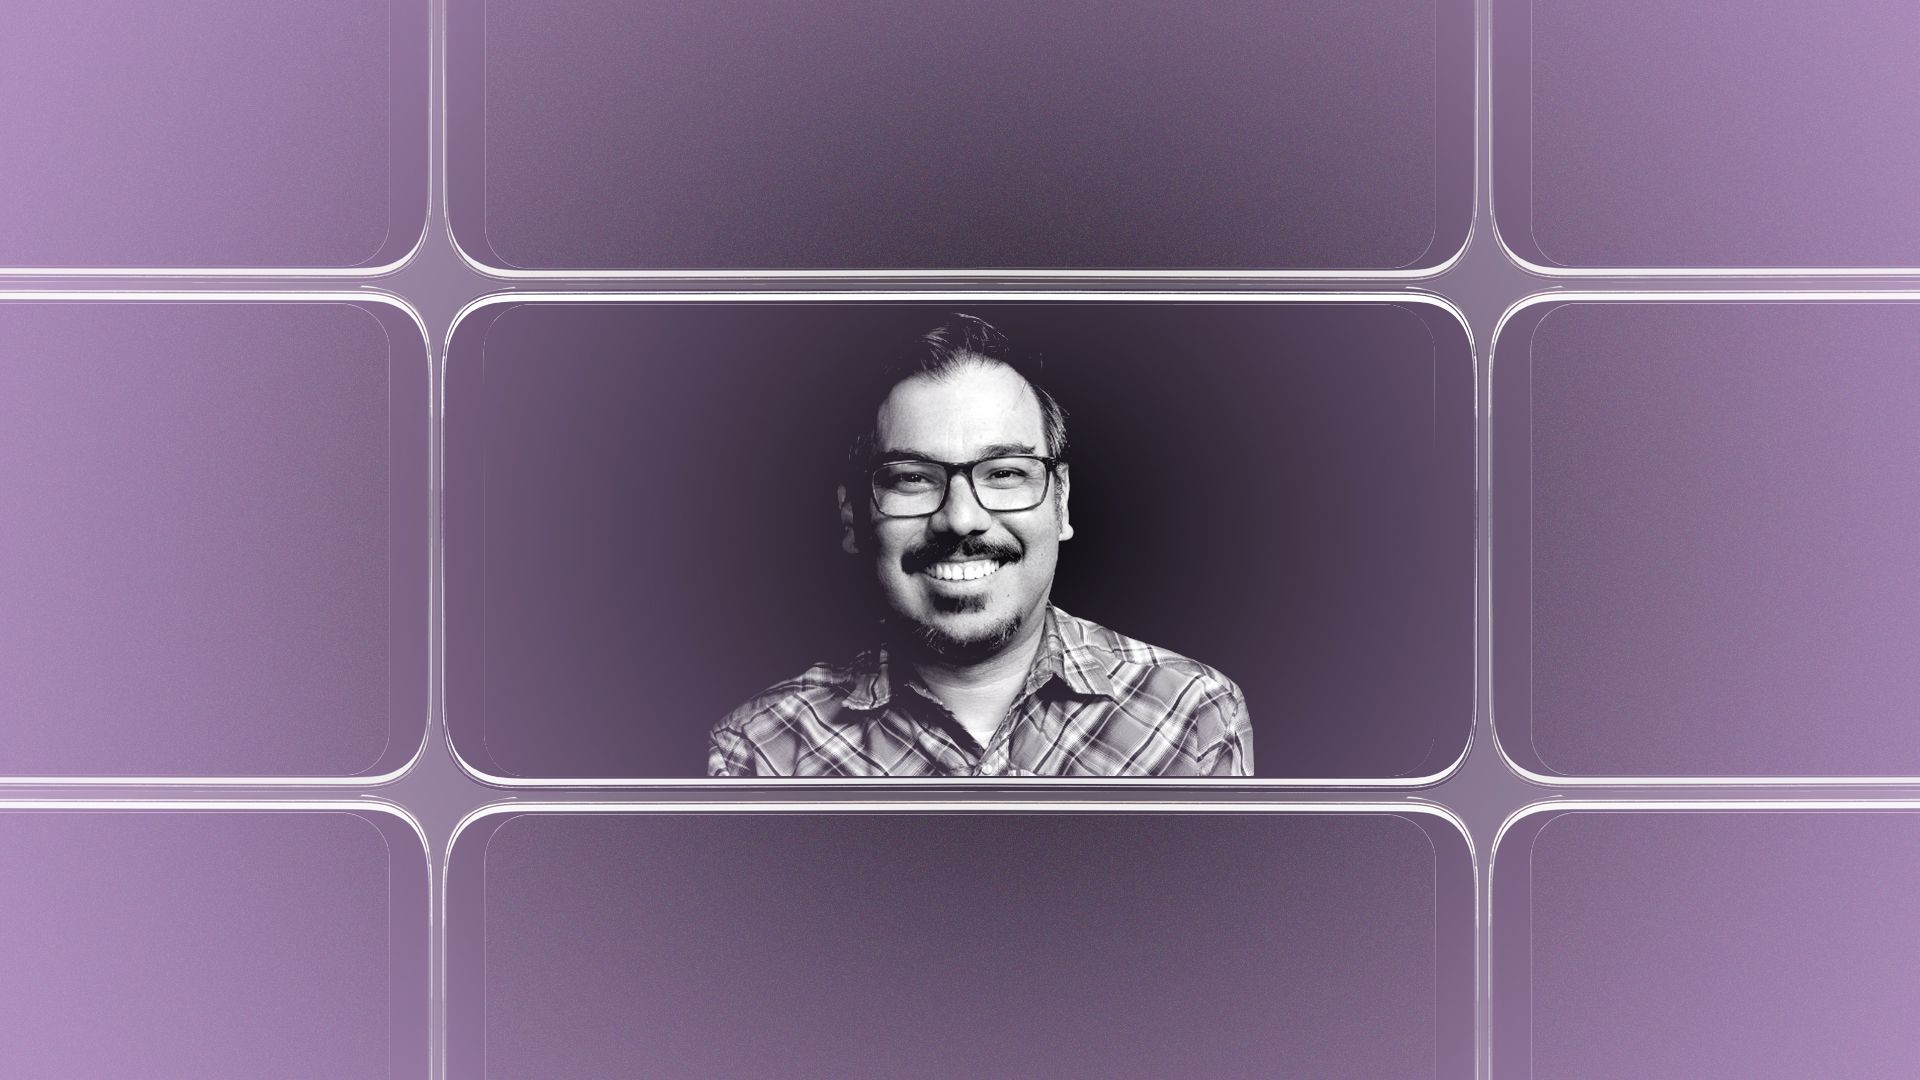 Photo illustration of a grid of smartphone screens, the center one showing an image of José Ralat.